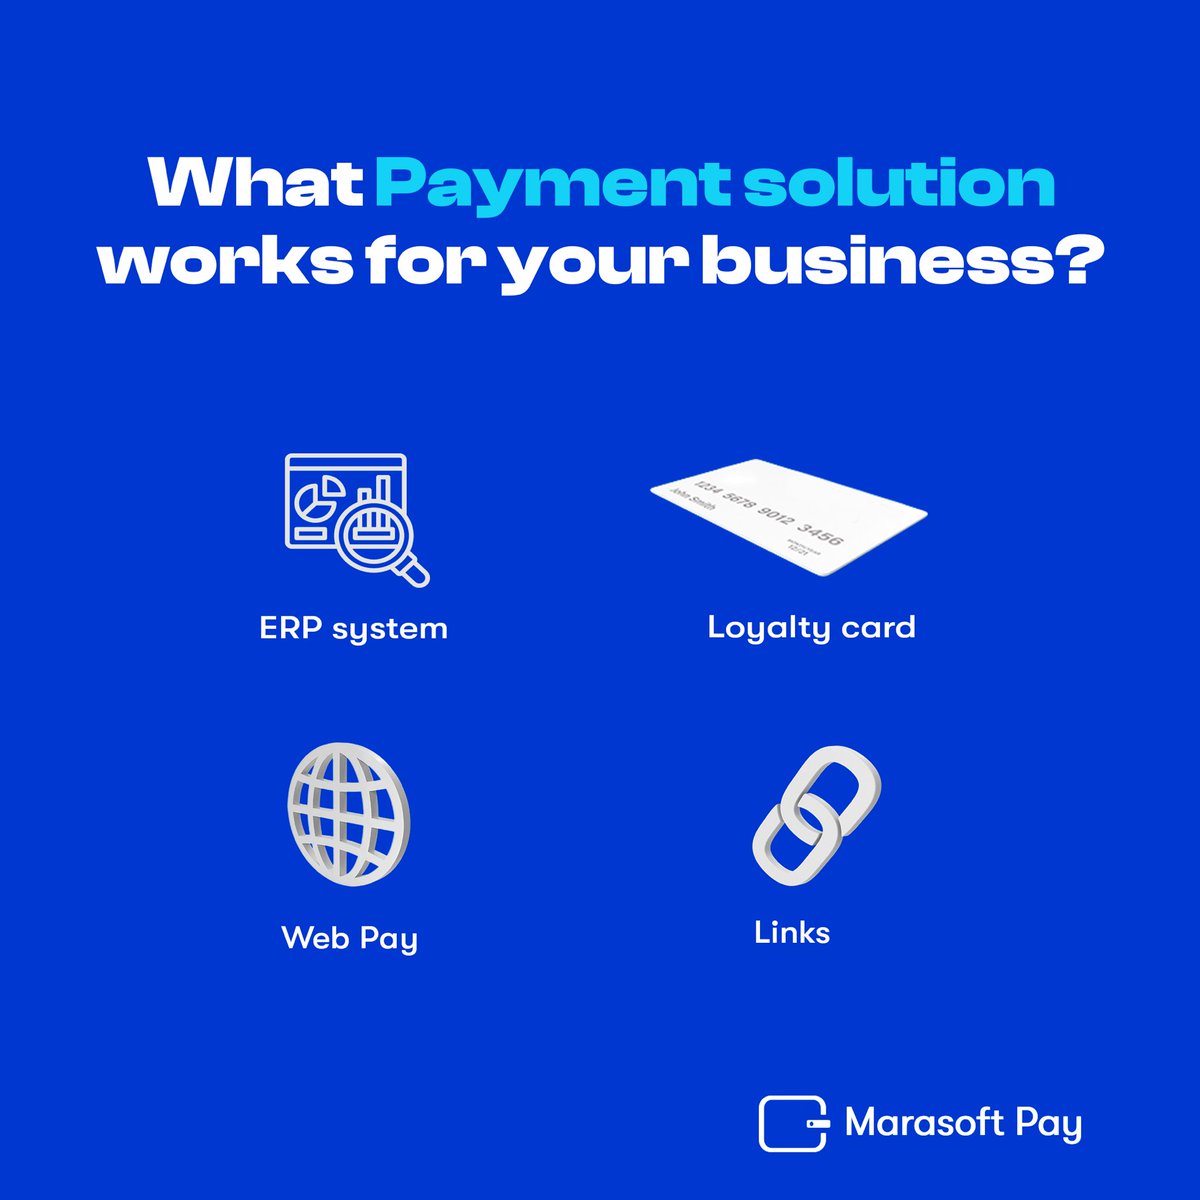 Upgrade your payment solution game and find one that makes payment easy for your customers thereby promoting your business growth
You tell us, we match you with the perfect payment solution to help your business flourish

What are you waiting for?

#MarasoftPay #paymentsolutions